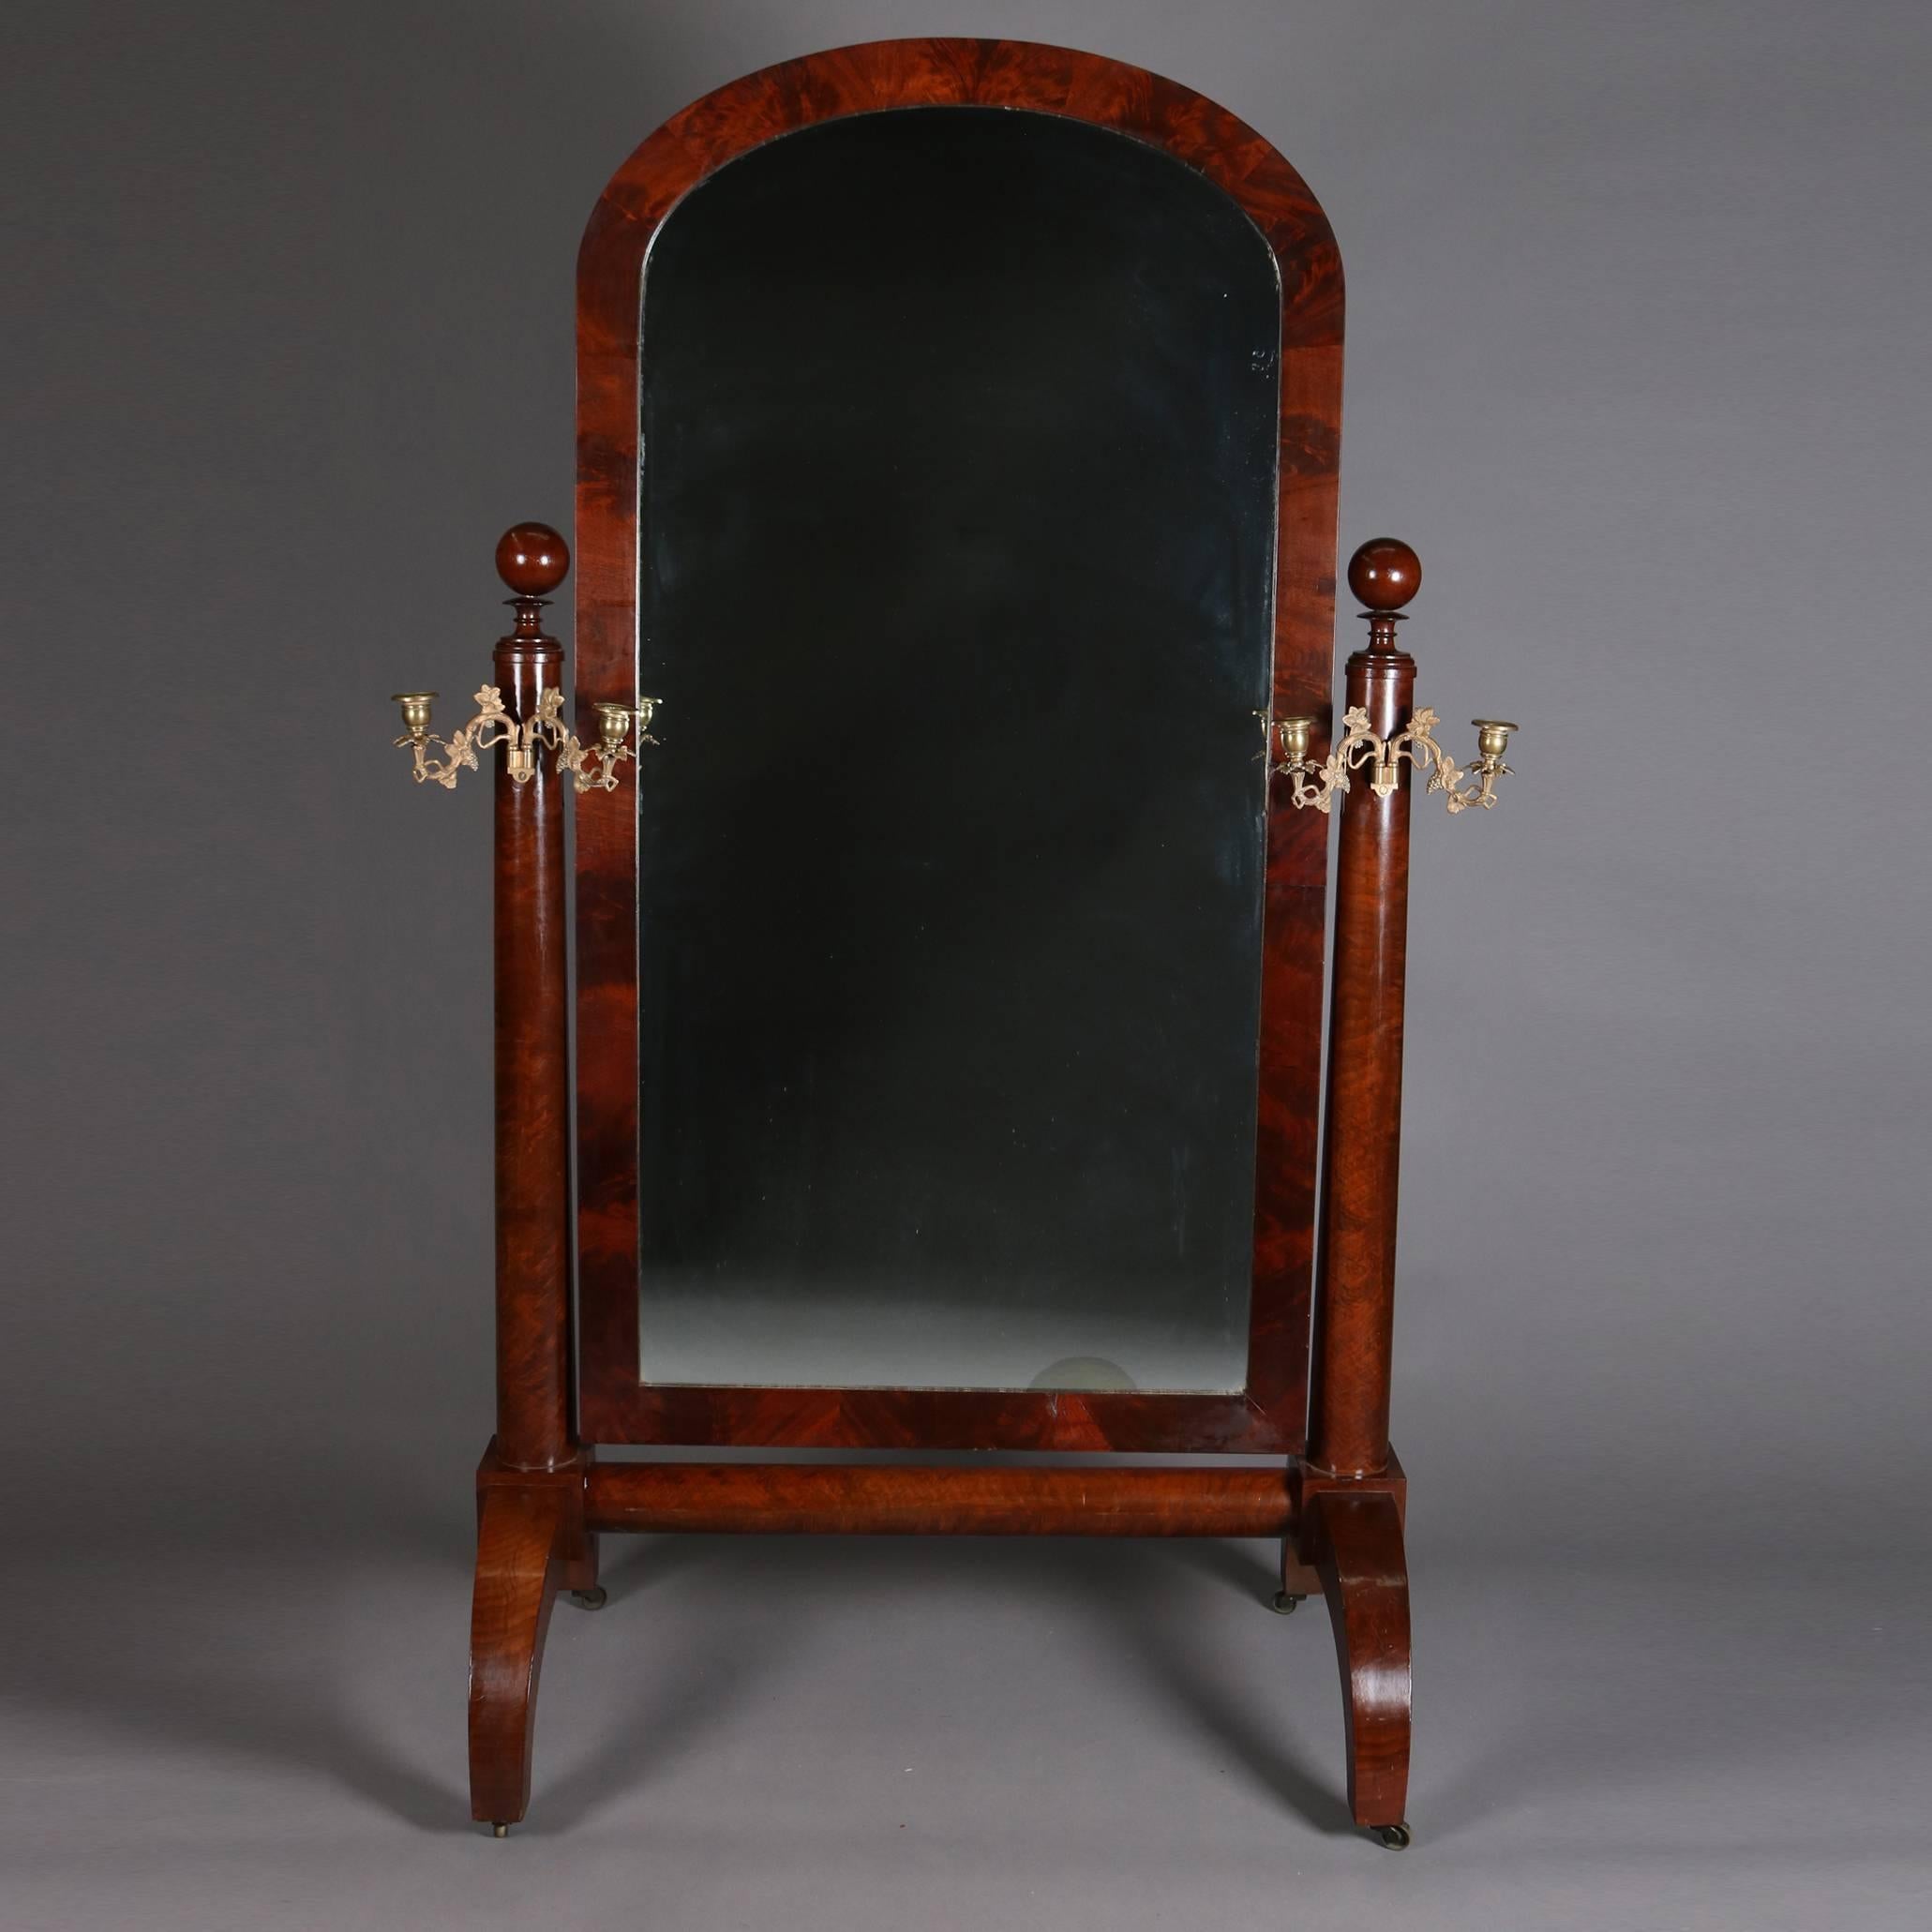 Antique American Empire Quervelle school cheval dressing mirror features flame mahogany frame, arched mirror flanked by grape and leaf form double candelabra, and seated on trestle base with arched legs each having central cast bronze medallion,